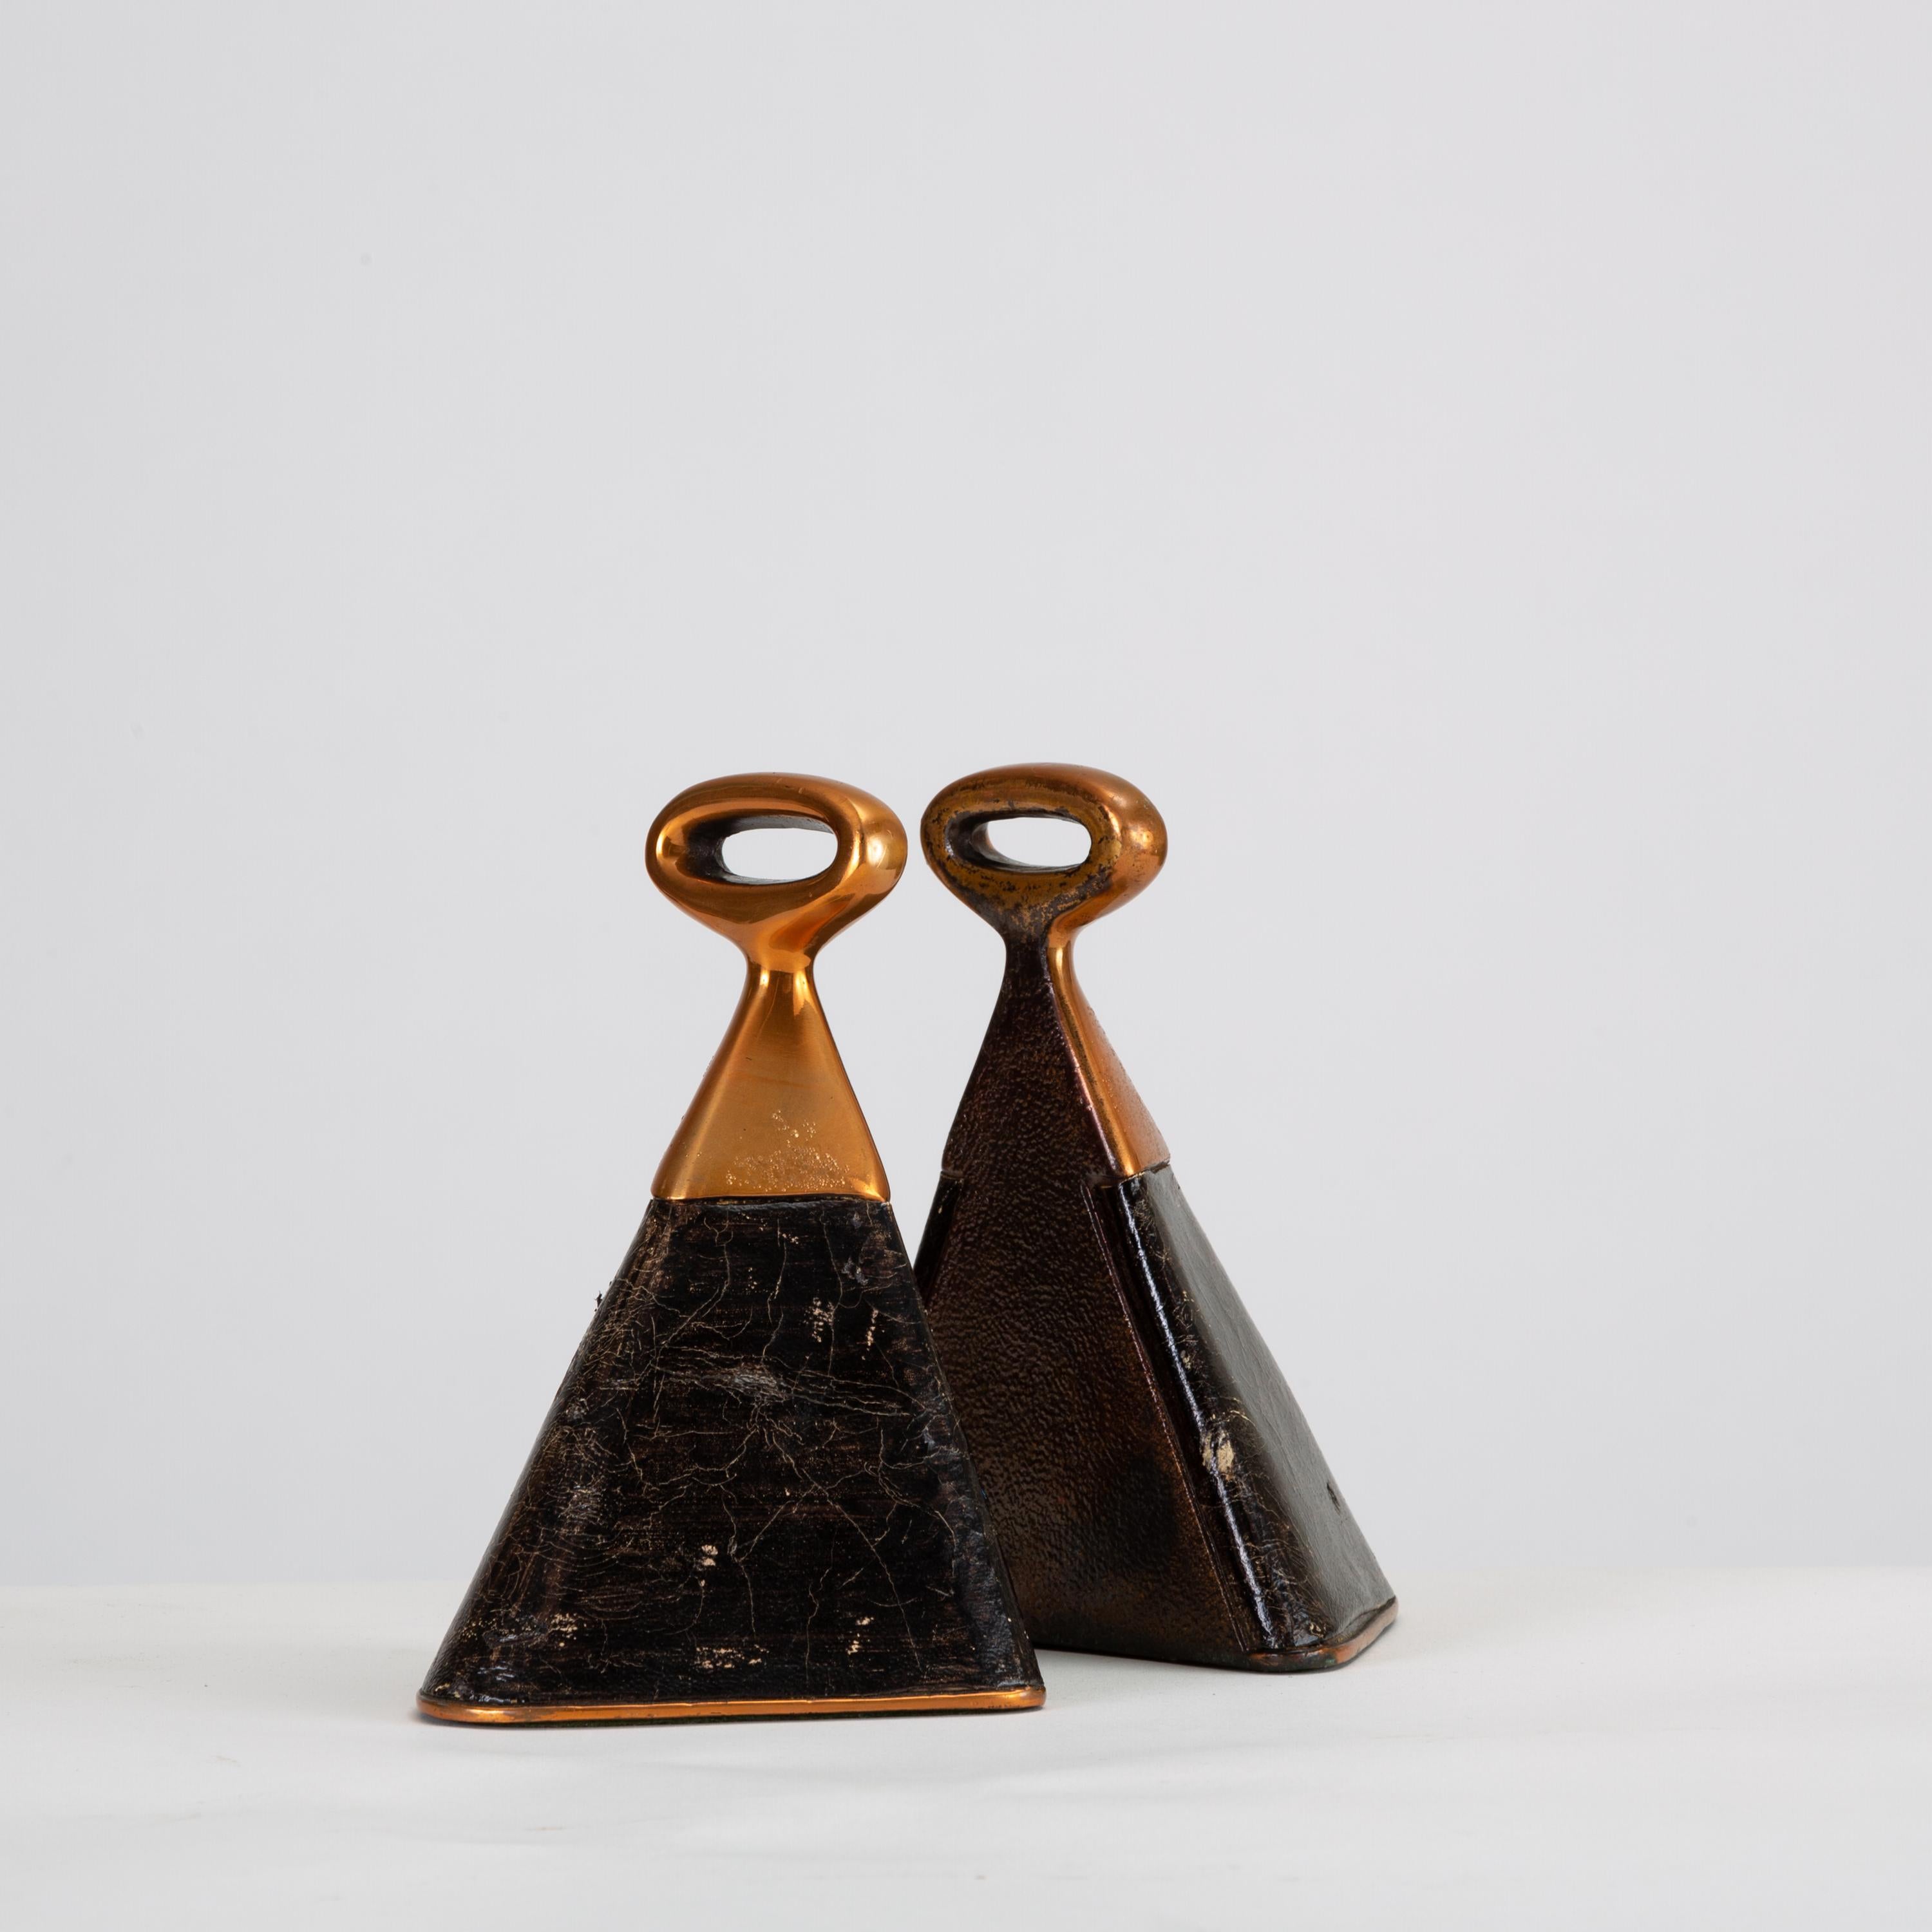 American Copper and Leather Bookends by Ben Seibel for Raymor